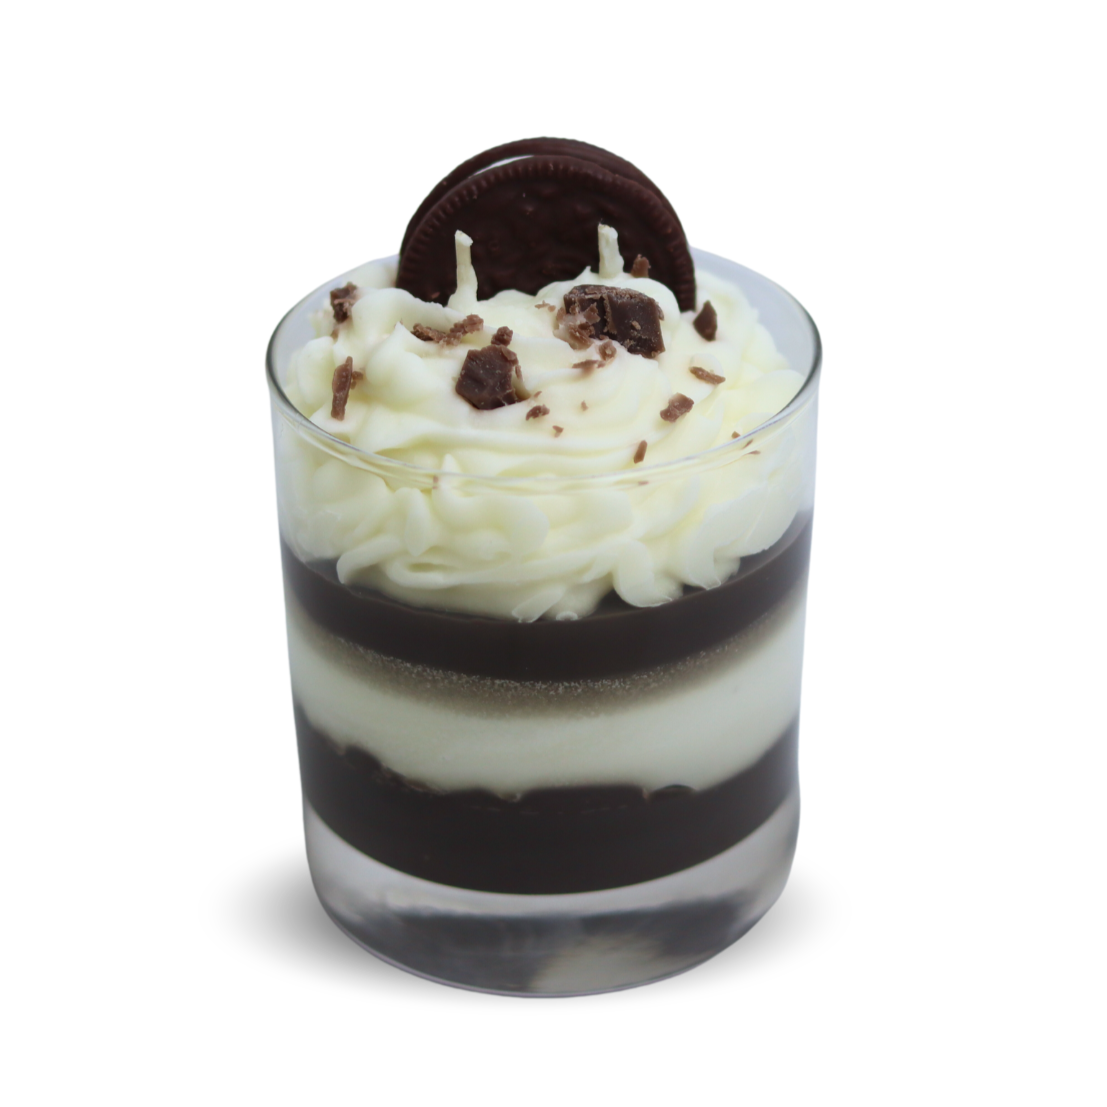 Cookies and Cream Dessert Candle